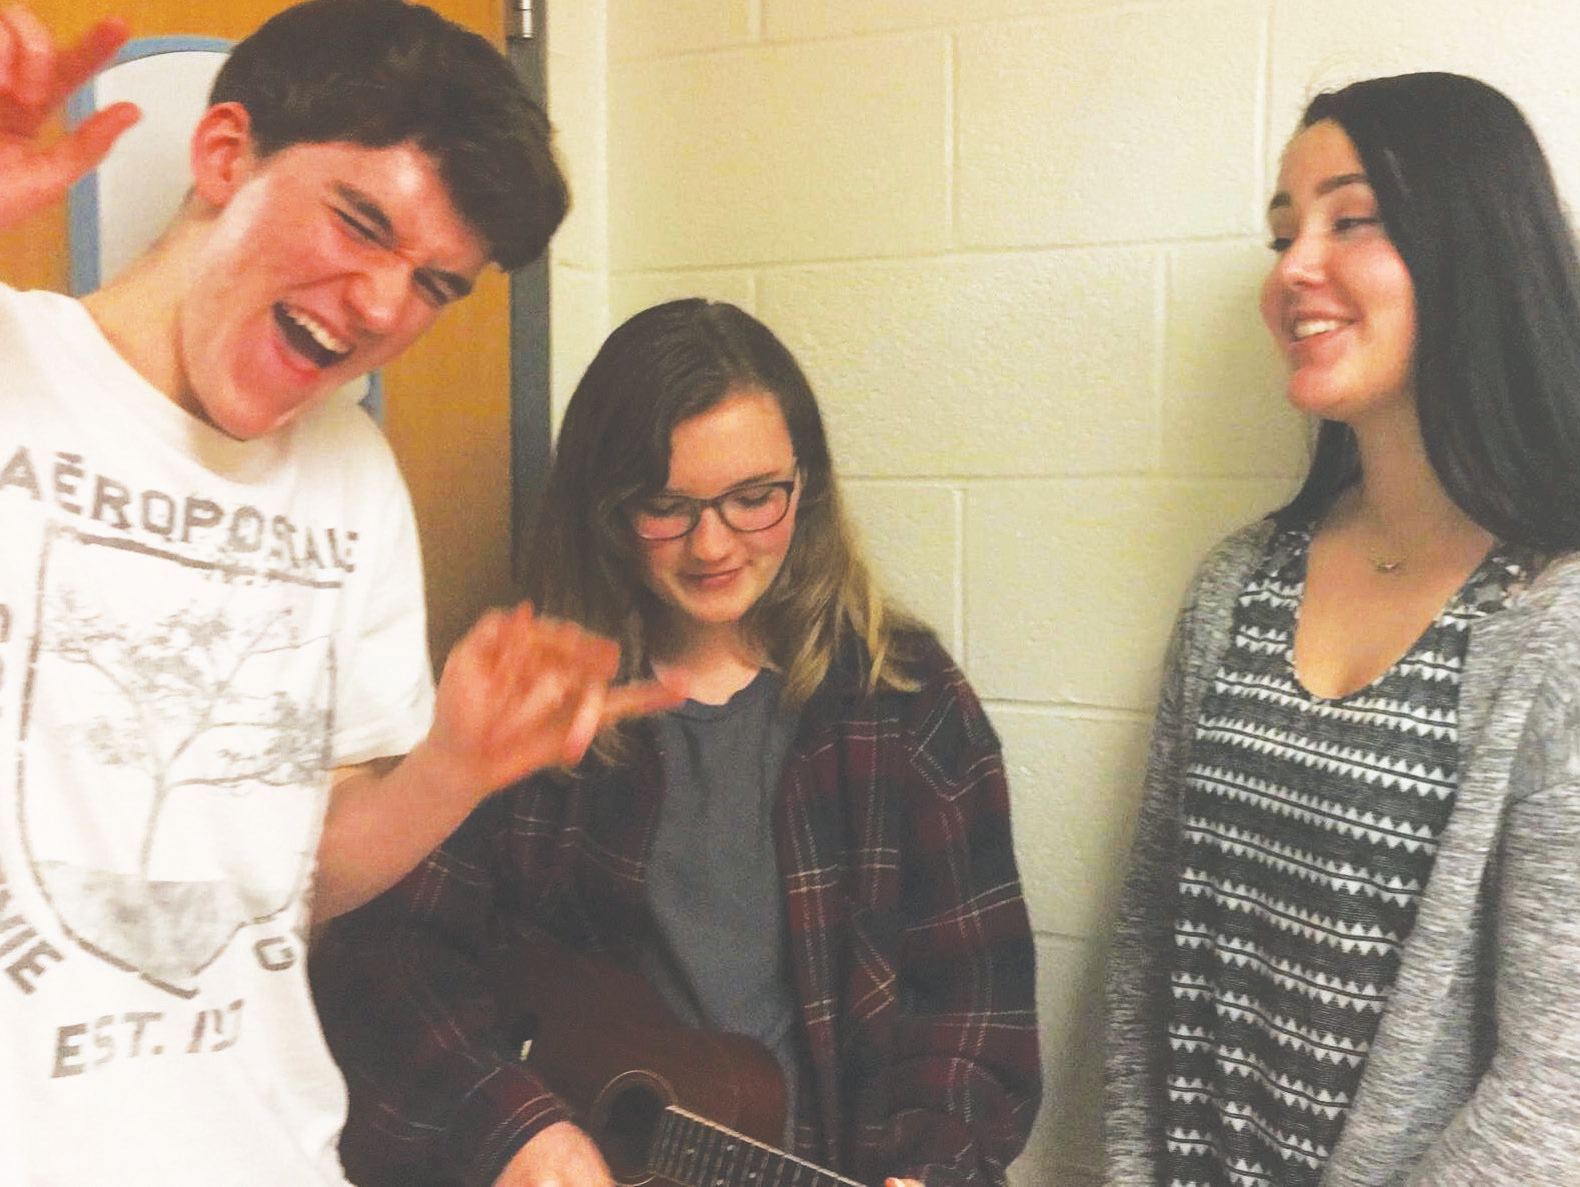 Junior Kyle Dalsimer, Junior Emily Trachel and Ioana Martin practicing their vocals for Singing Valentines in the hallways.